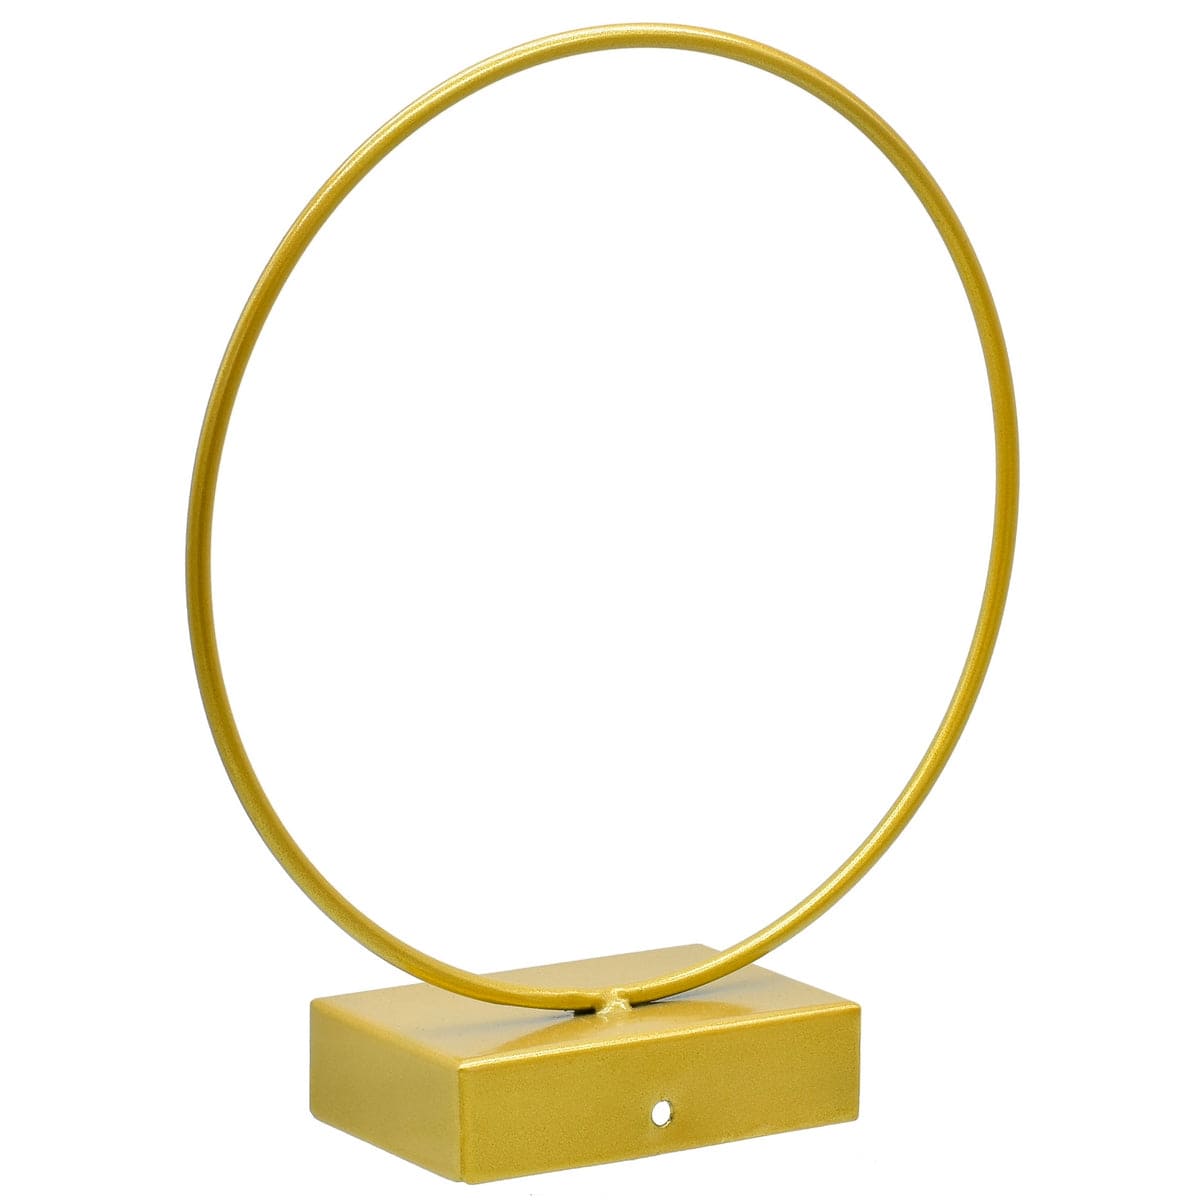 jags-mumbai Easel Glamorous Gold Round Metal Stand - 8 Inch Diameter, Contain 1 Unit